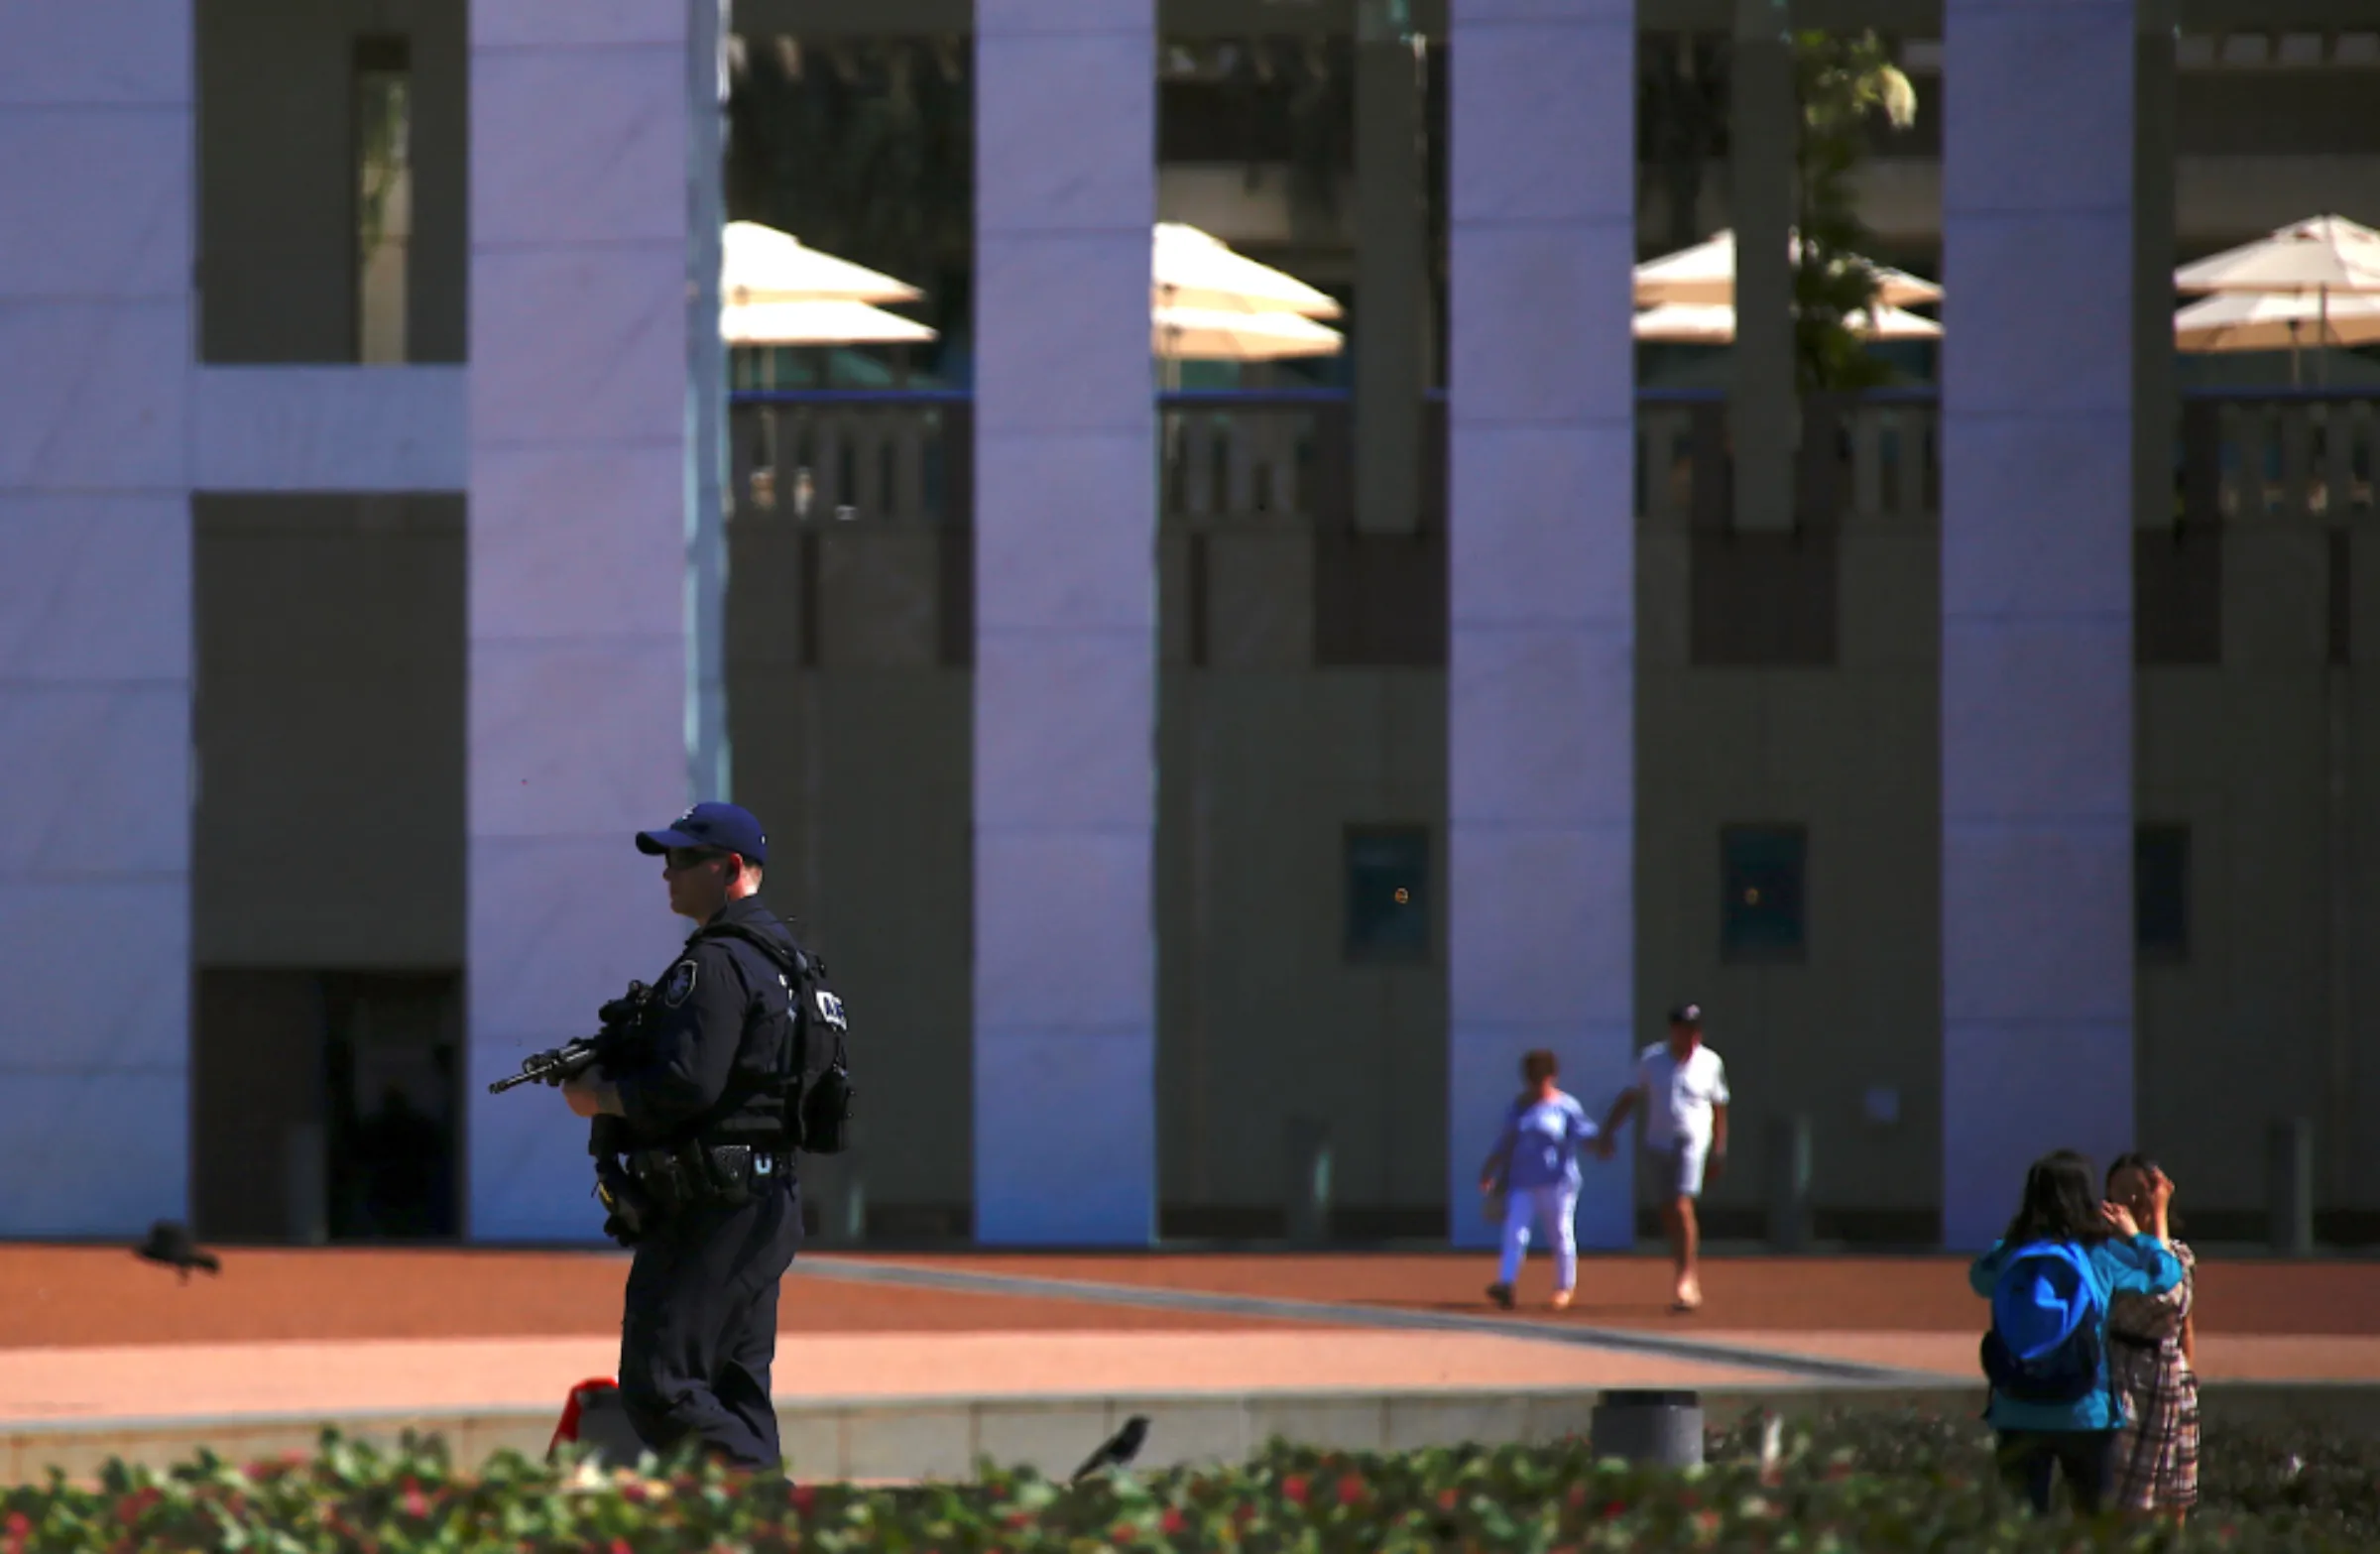 Tourists take photographs and walk near an Australian Federal policeman carrying a gun as he patrols the forecourt of Australia's Parliament House in Canberra, Australia, October 16, 2017